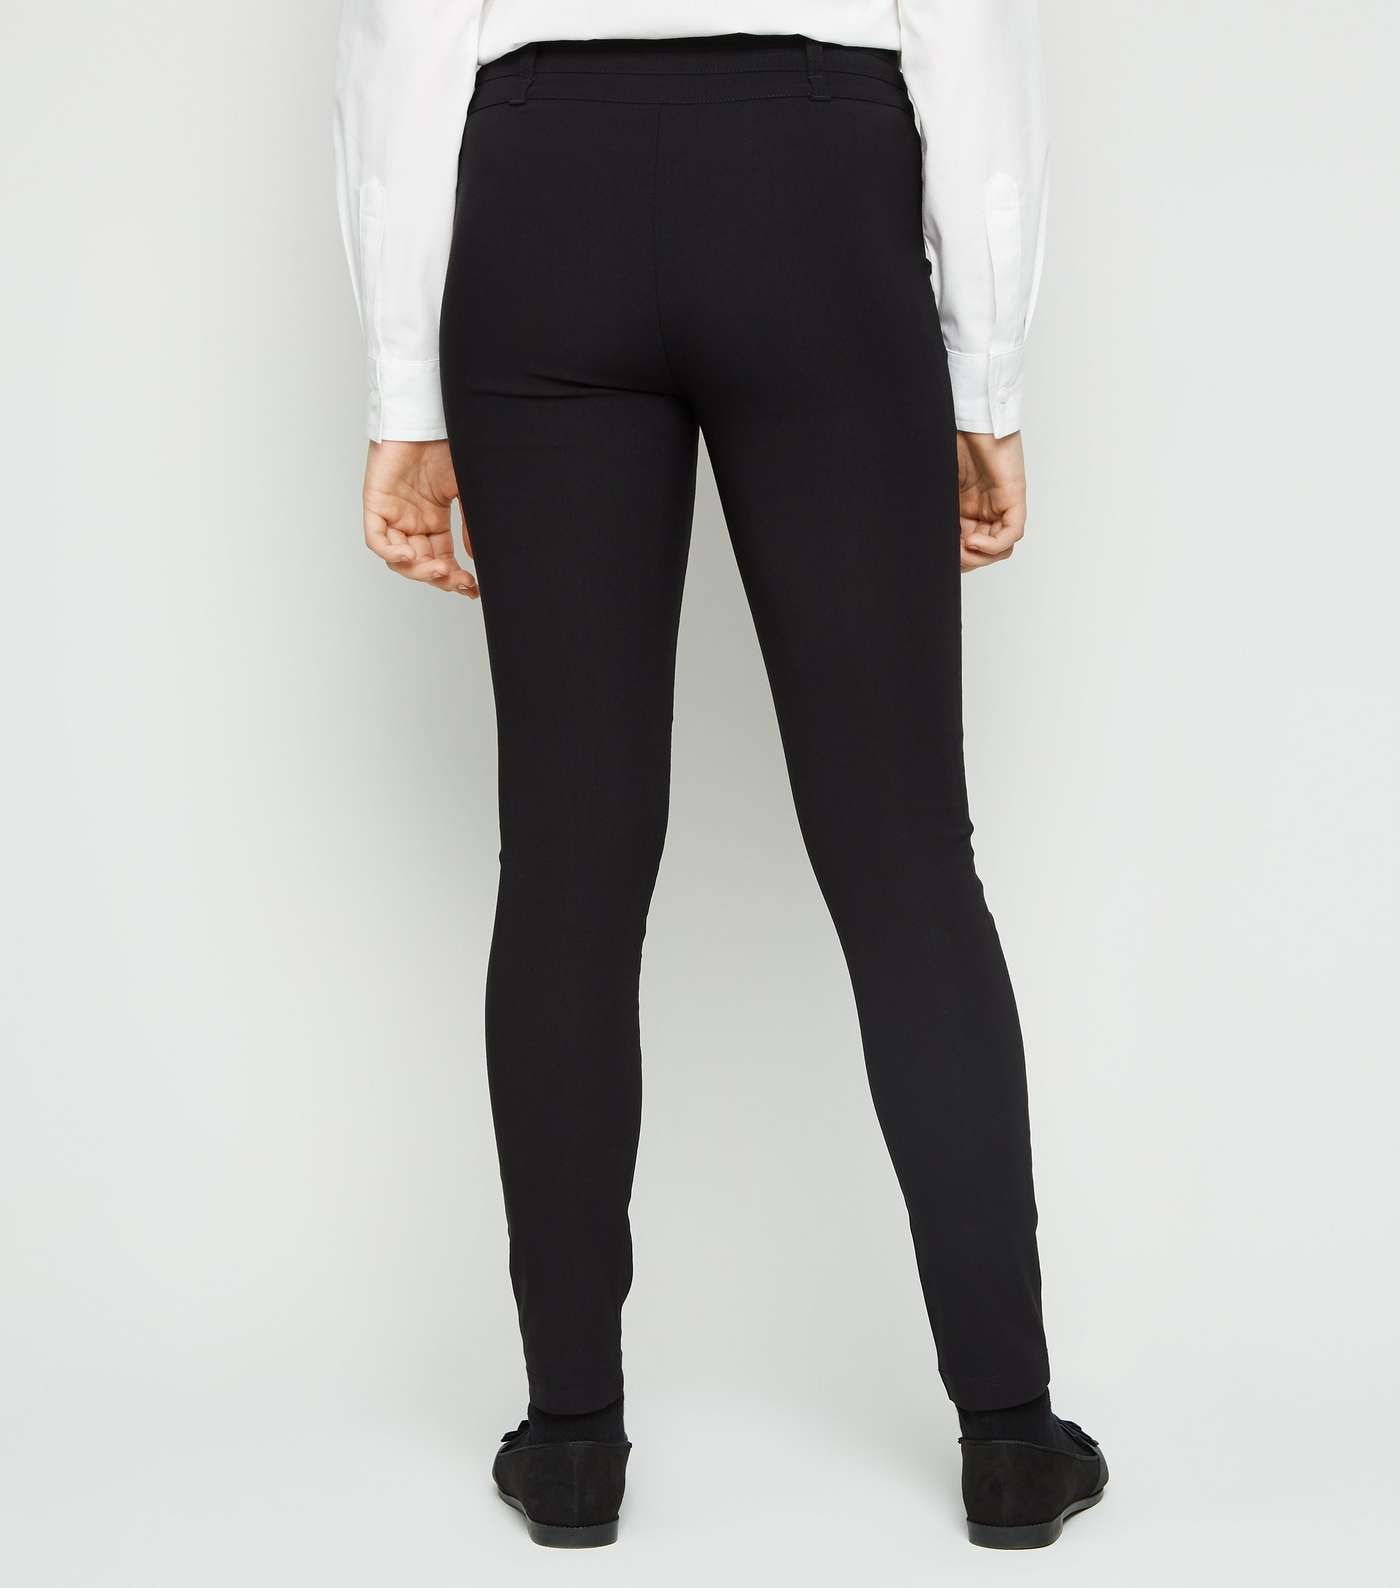 Girls Black 3 Button Super Skinny Trousers Image 3